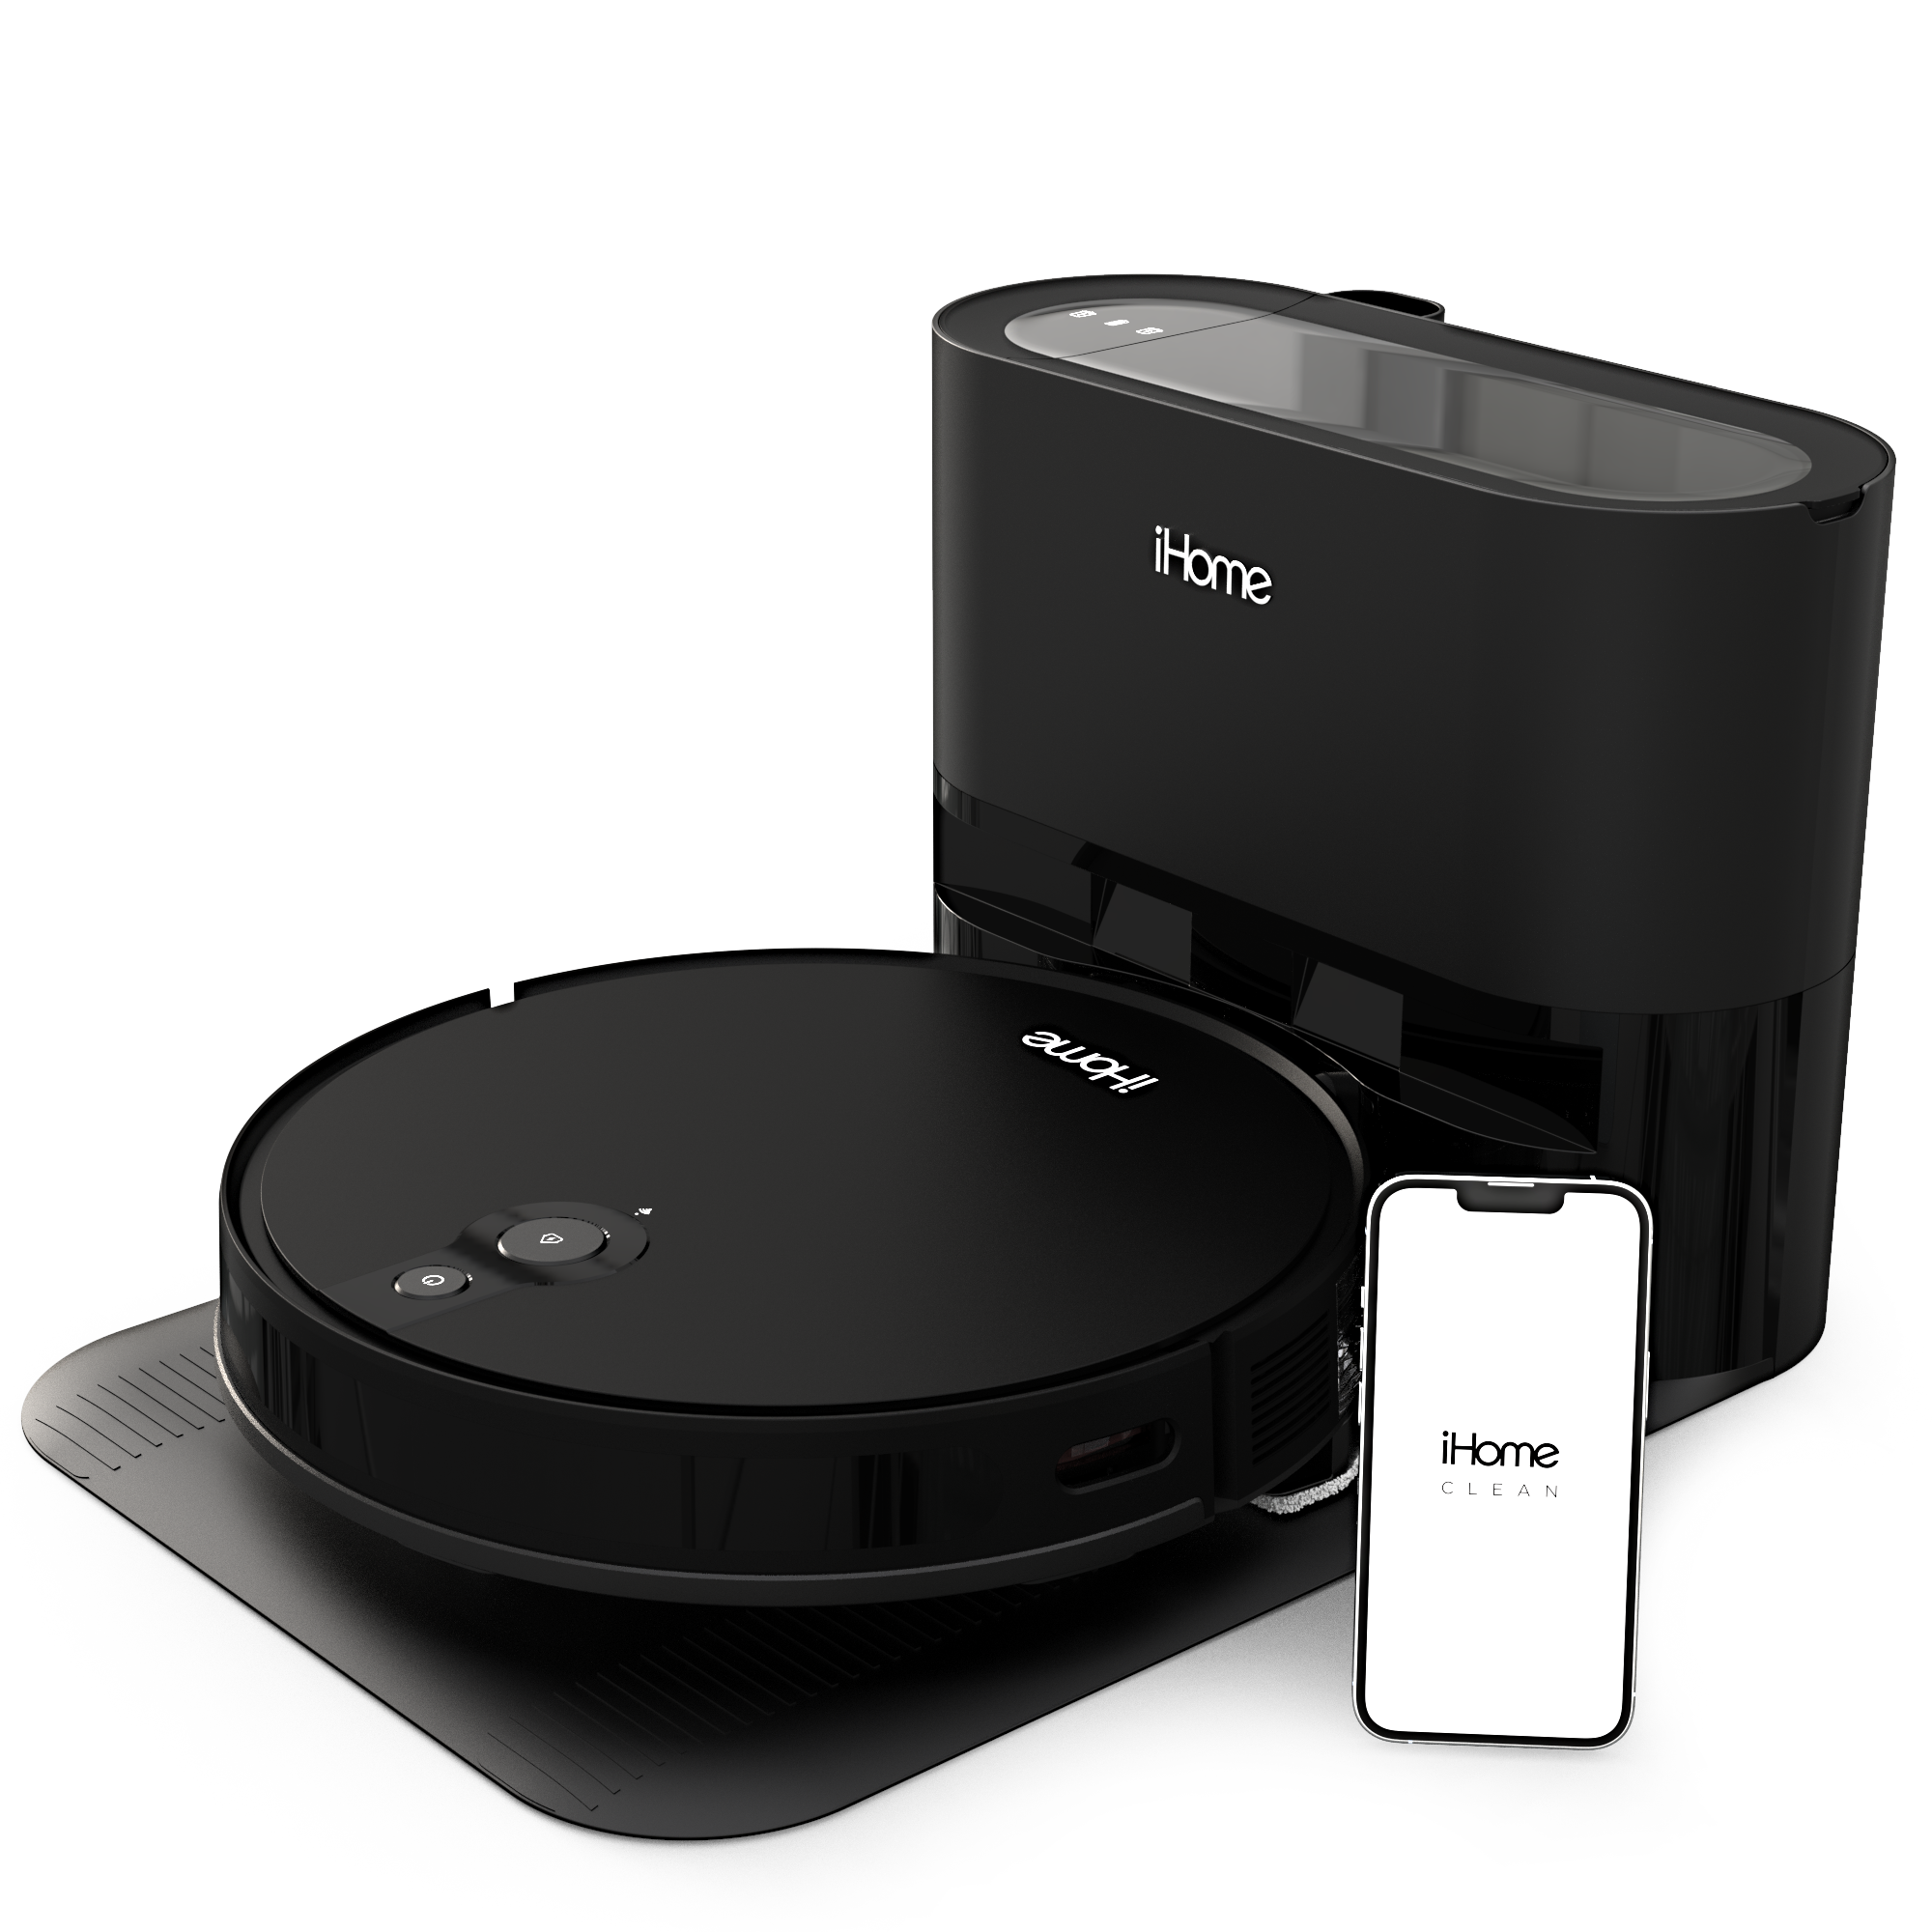 iHome AutoVac Eclipse Pro 3-in-1 Robot Vacuum and Vibrating Mop, Homemap Navigation - image 1 of 10